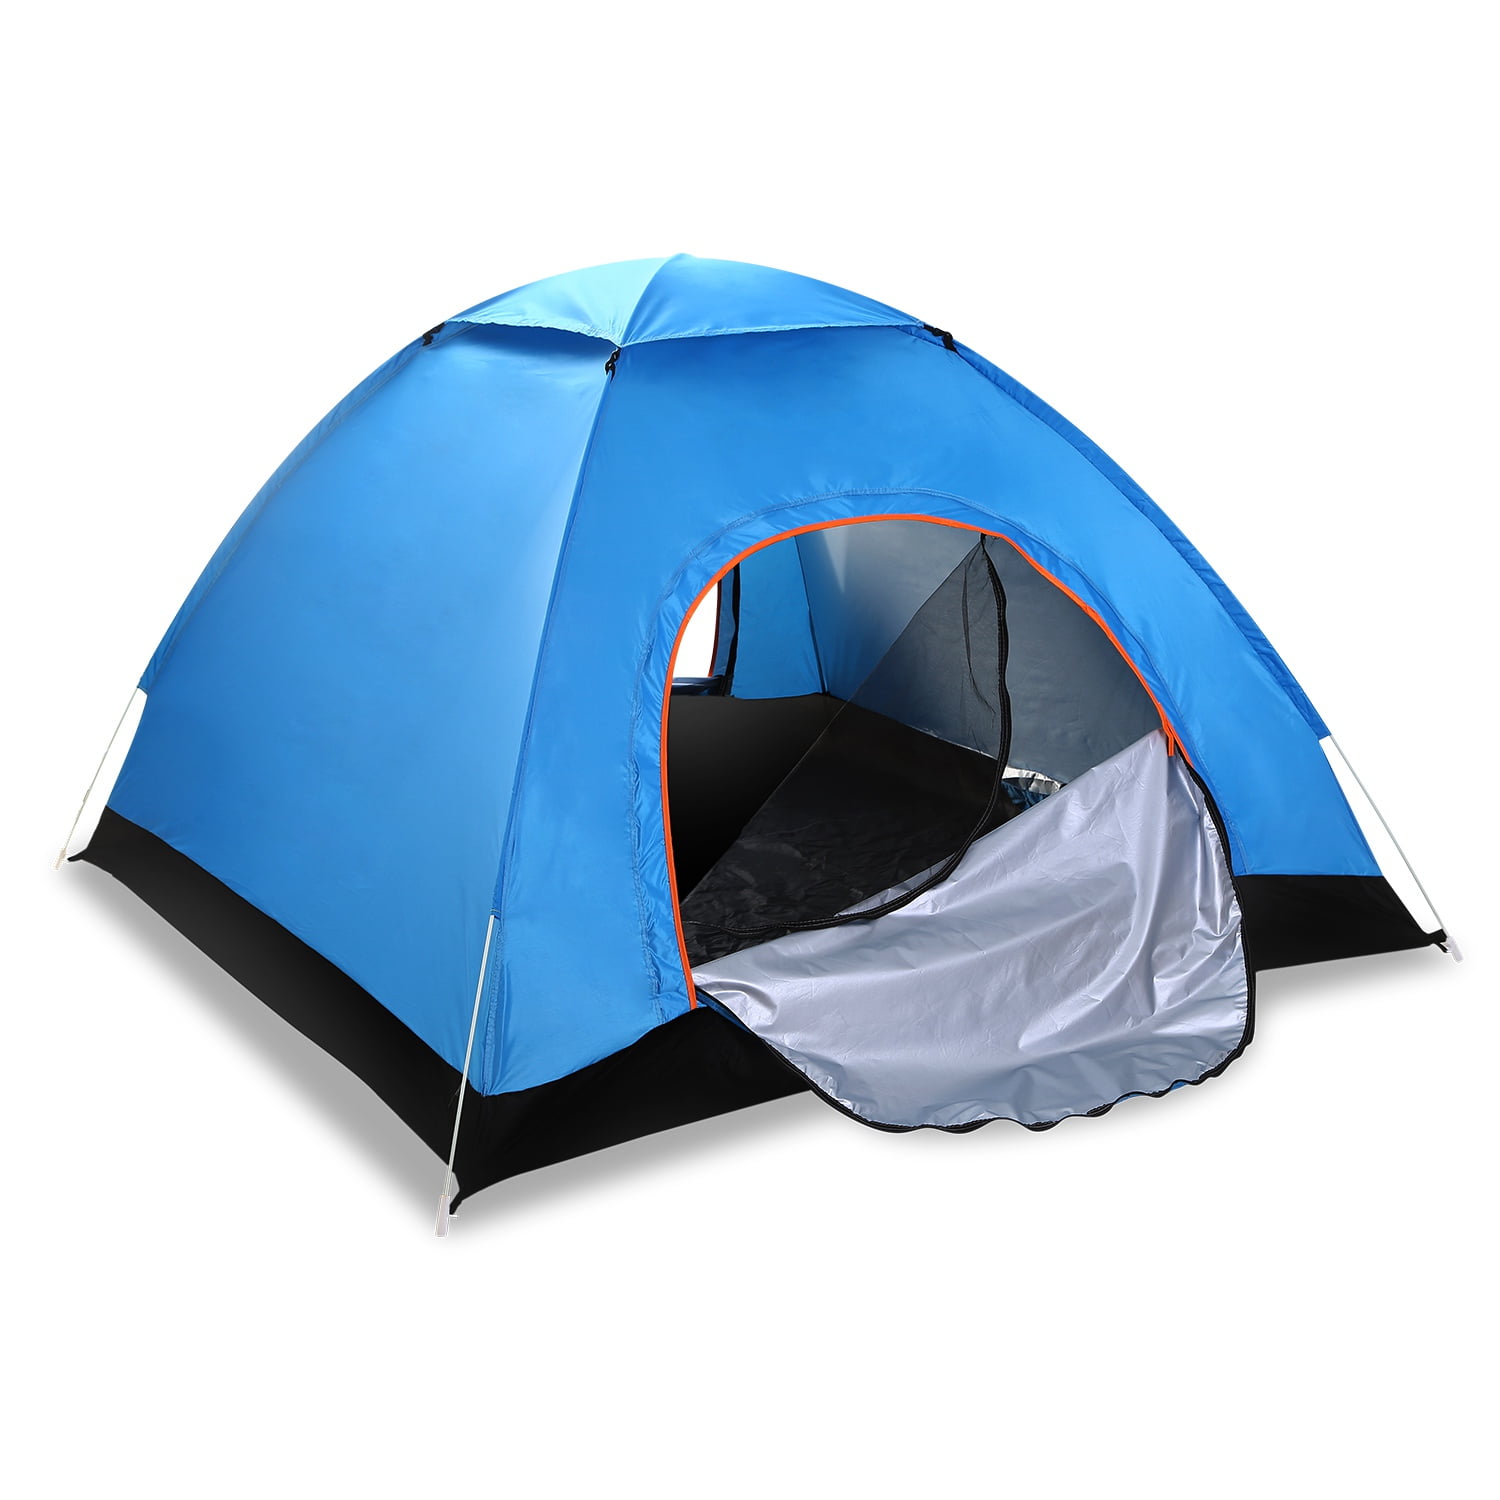 Details about  / 3-4 Person Double Layer Family Camping Tent Outdoor Instant Cabin for Hiking US